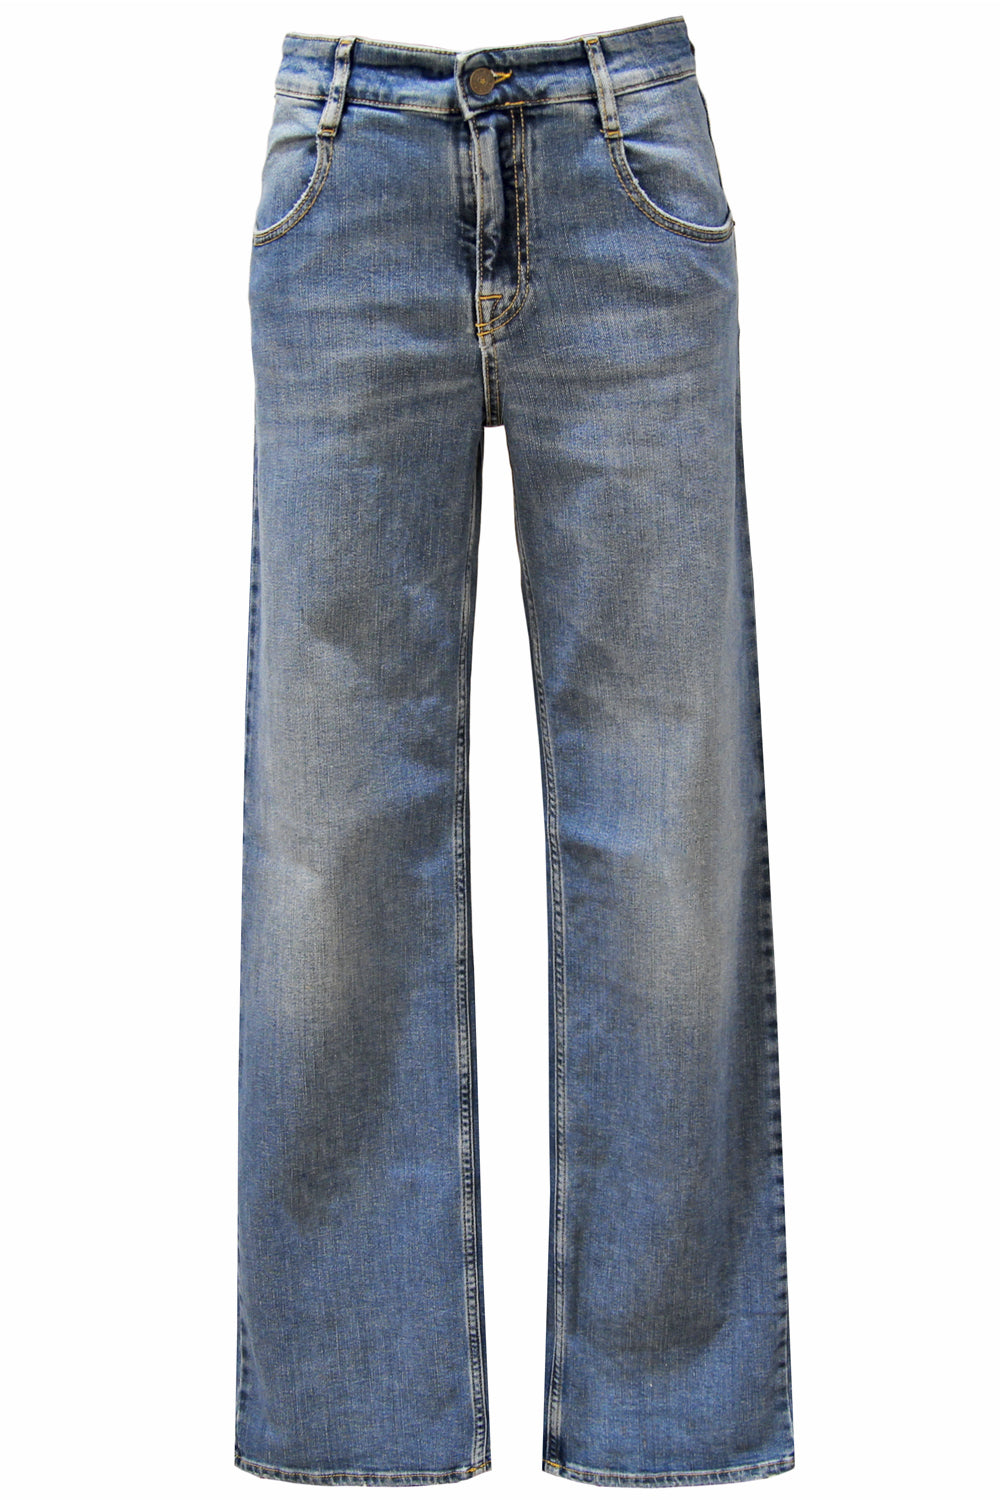 Image of CYCLE Jeans Diana mid rise volume straight leg